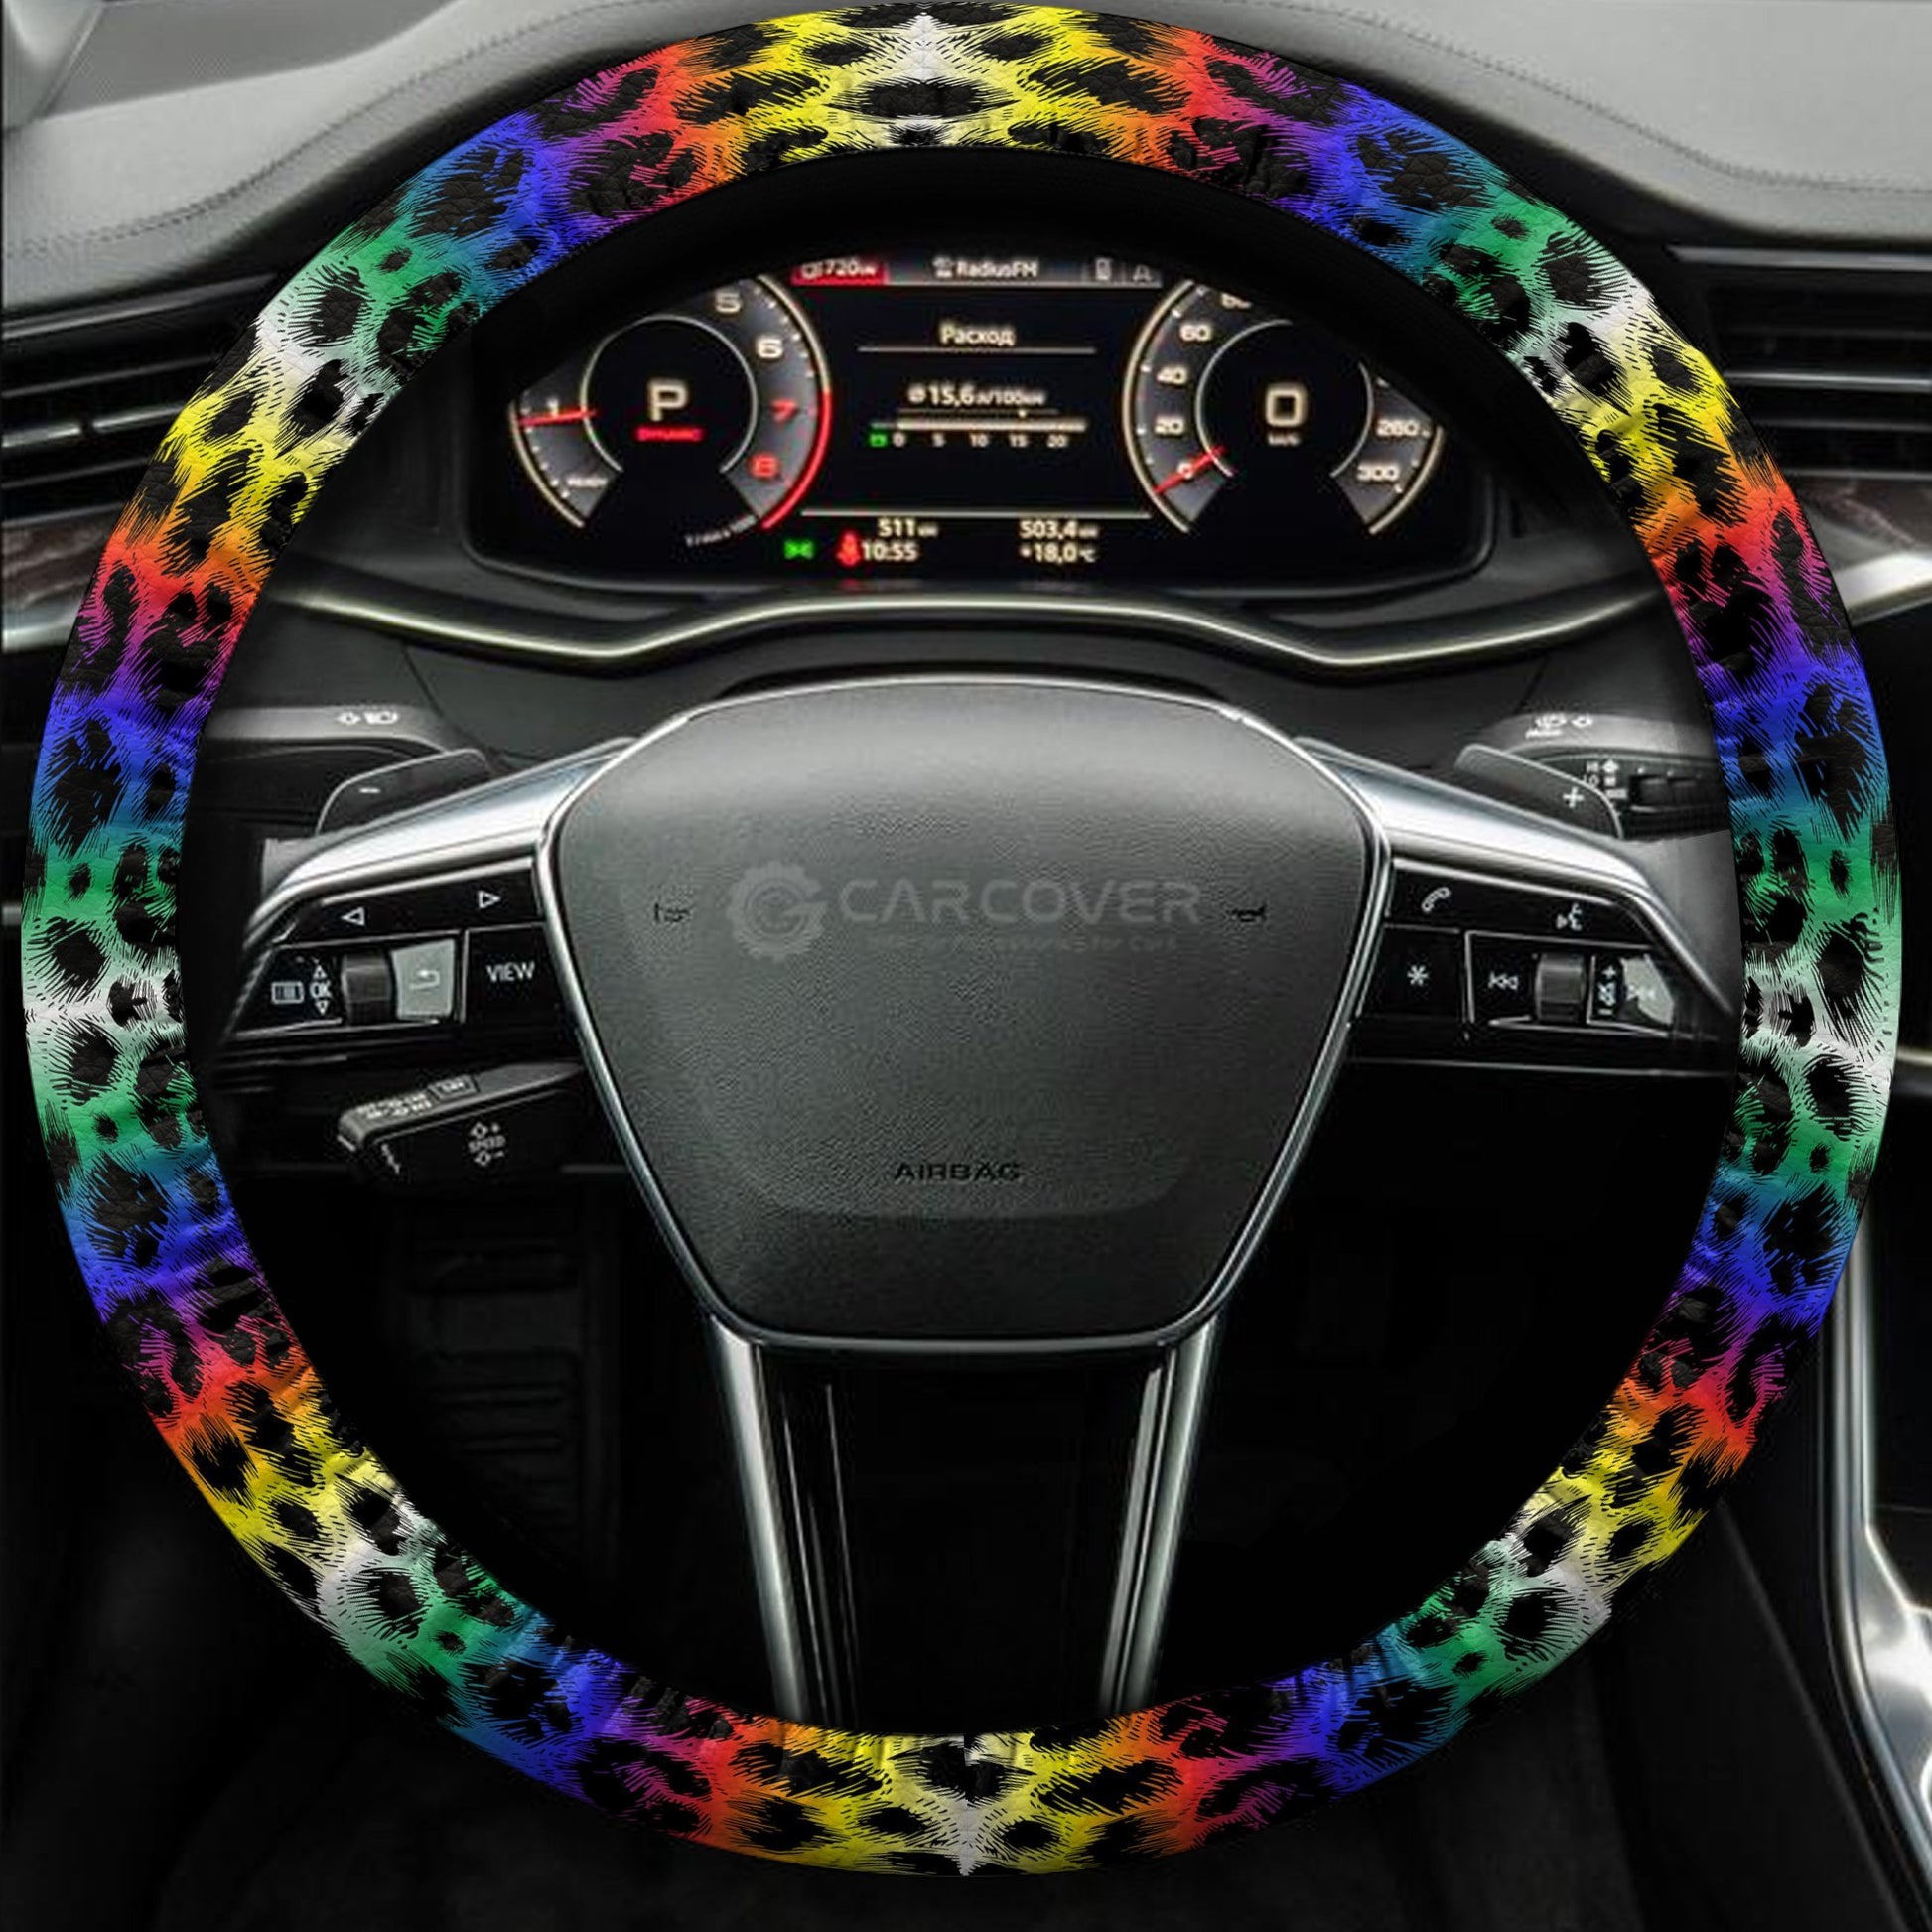 Colorful Leopard Skin Steering Wheel Cover Custom Animal Skin Printed Car Interior Accessories - Gearcarcover - 4